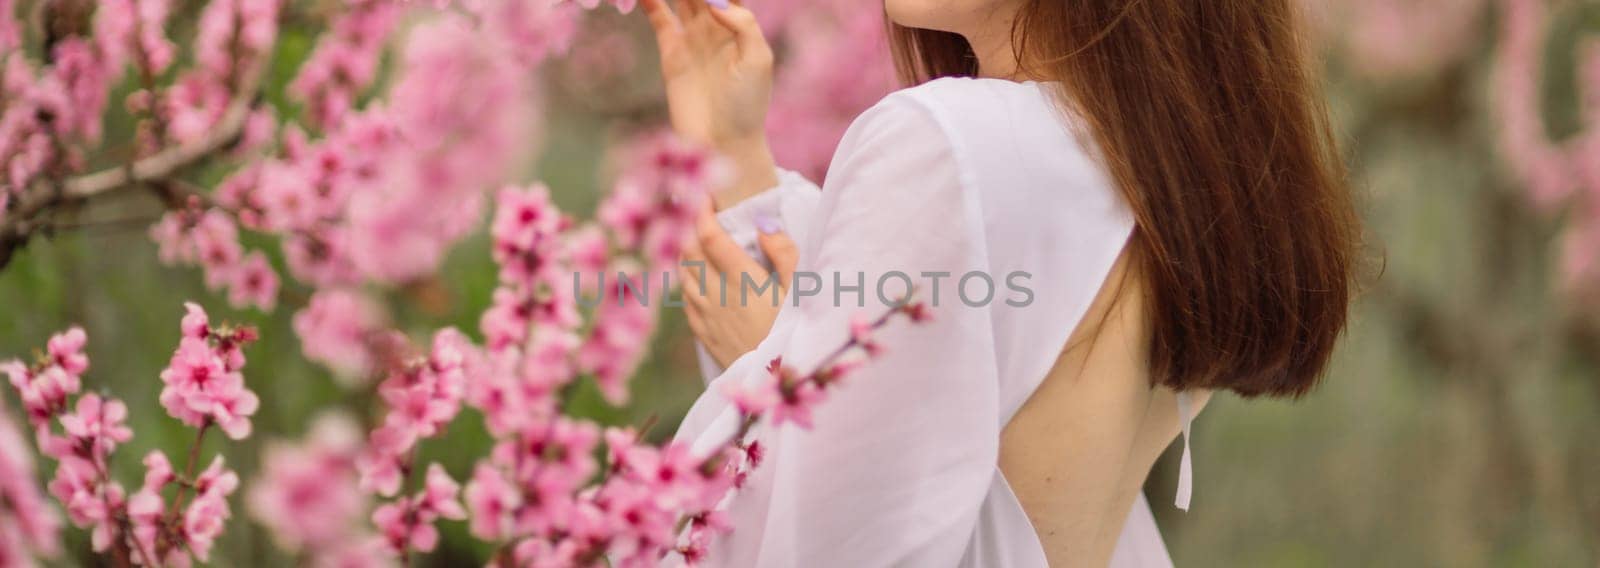 A girl is walking through a field of pink peach flowers. She is wearing a white dress and carrying a basket. The scene is peaceful and serene, with the pink flowers creating a beautiful by Matiunina